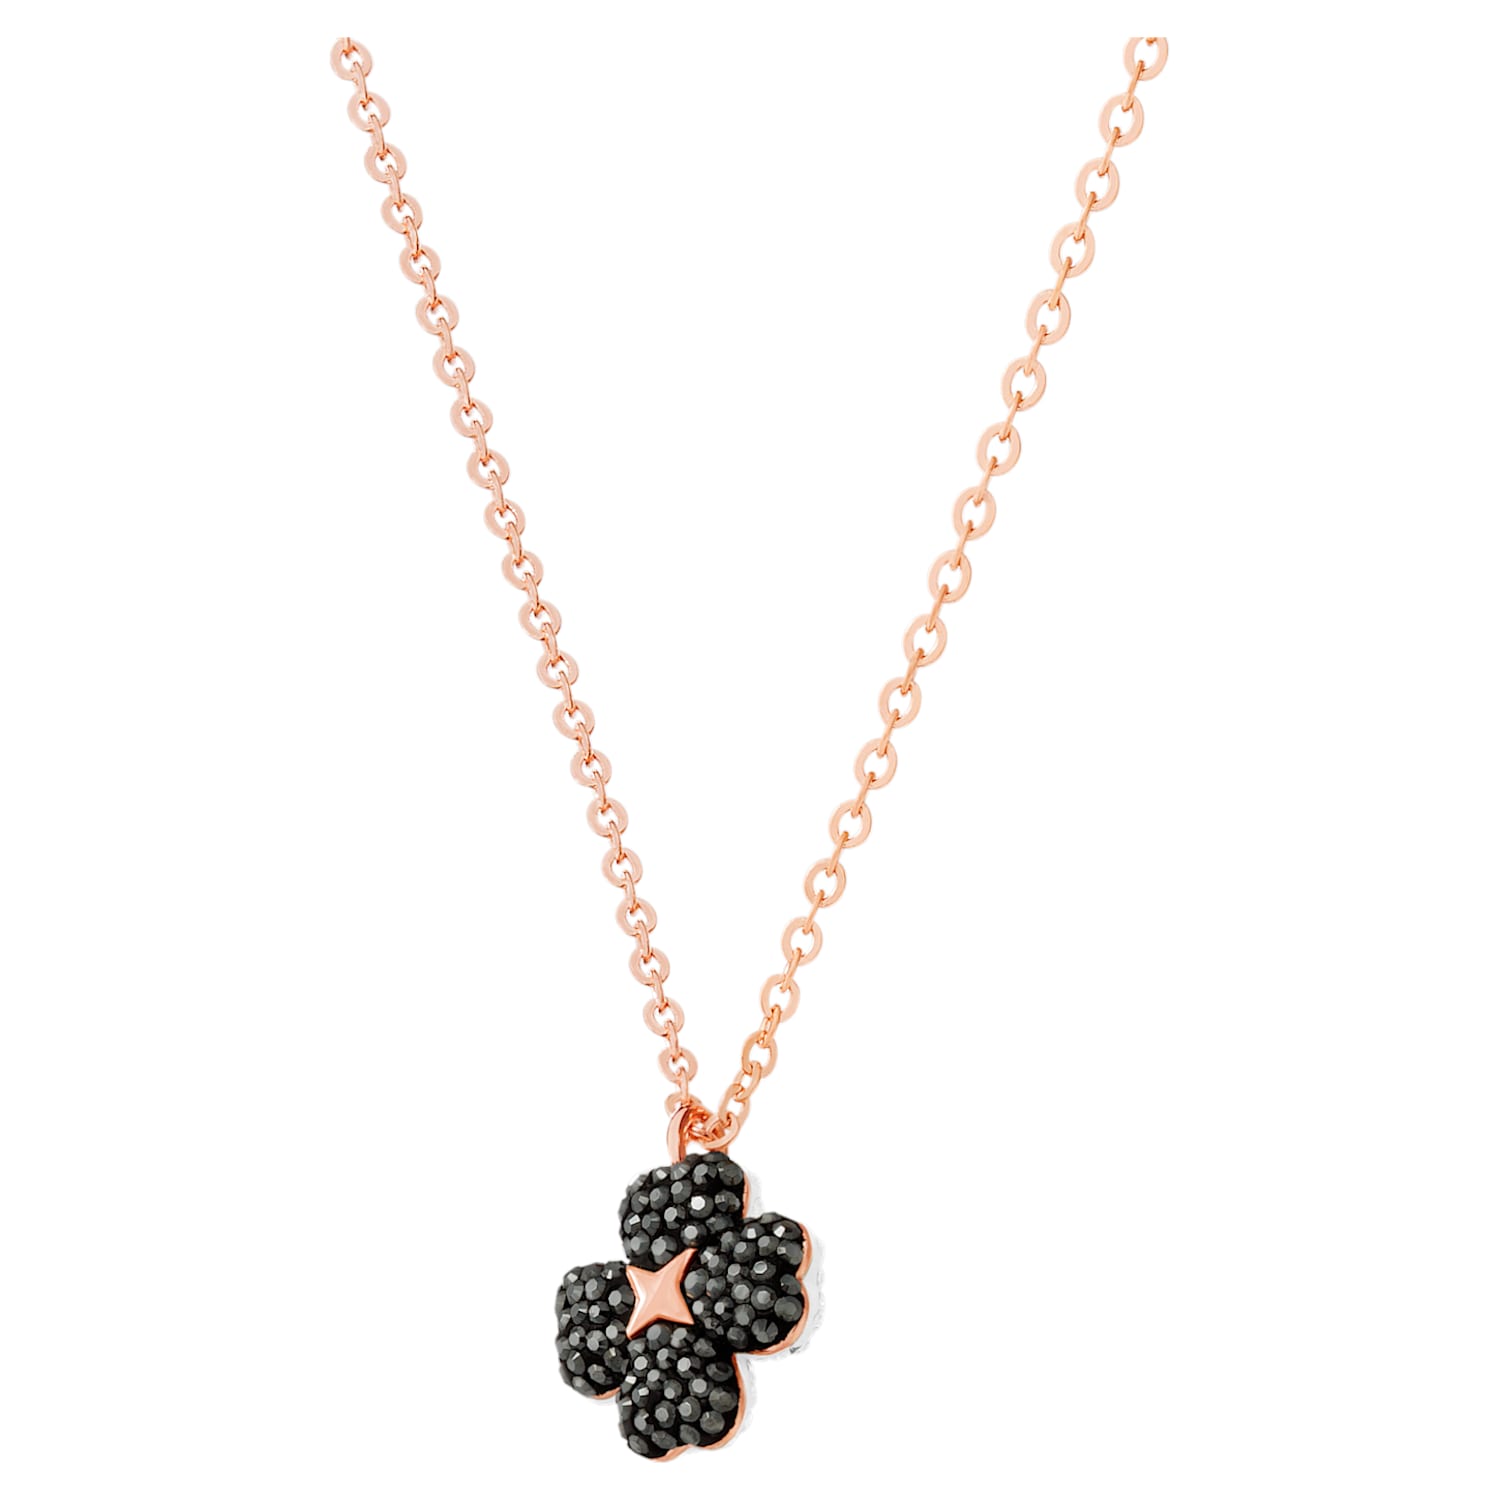 Black and flower necklace